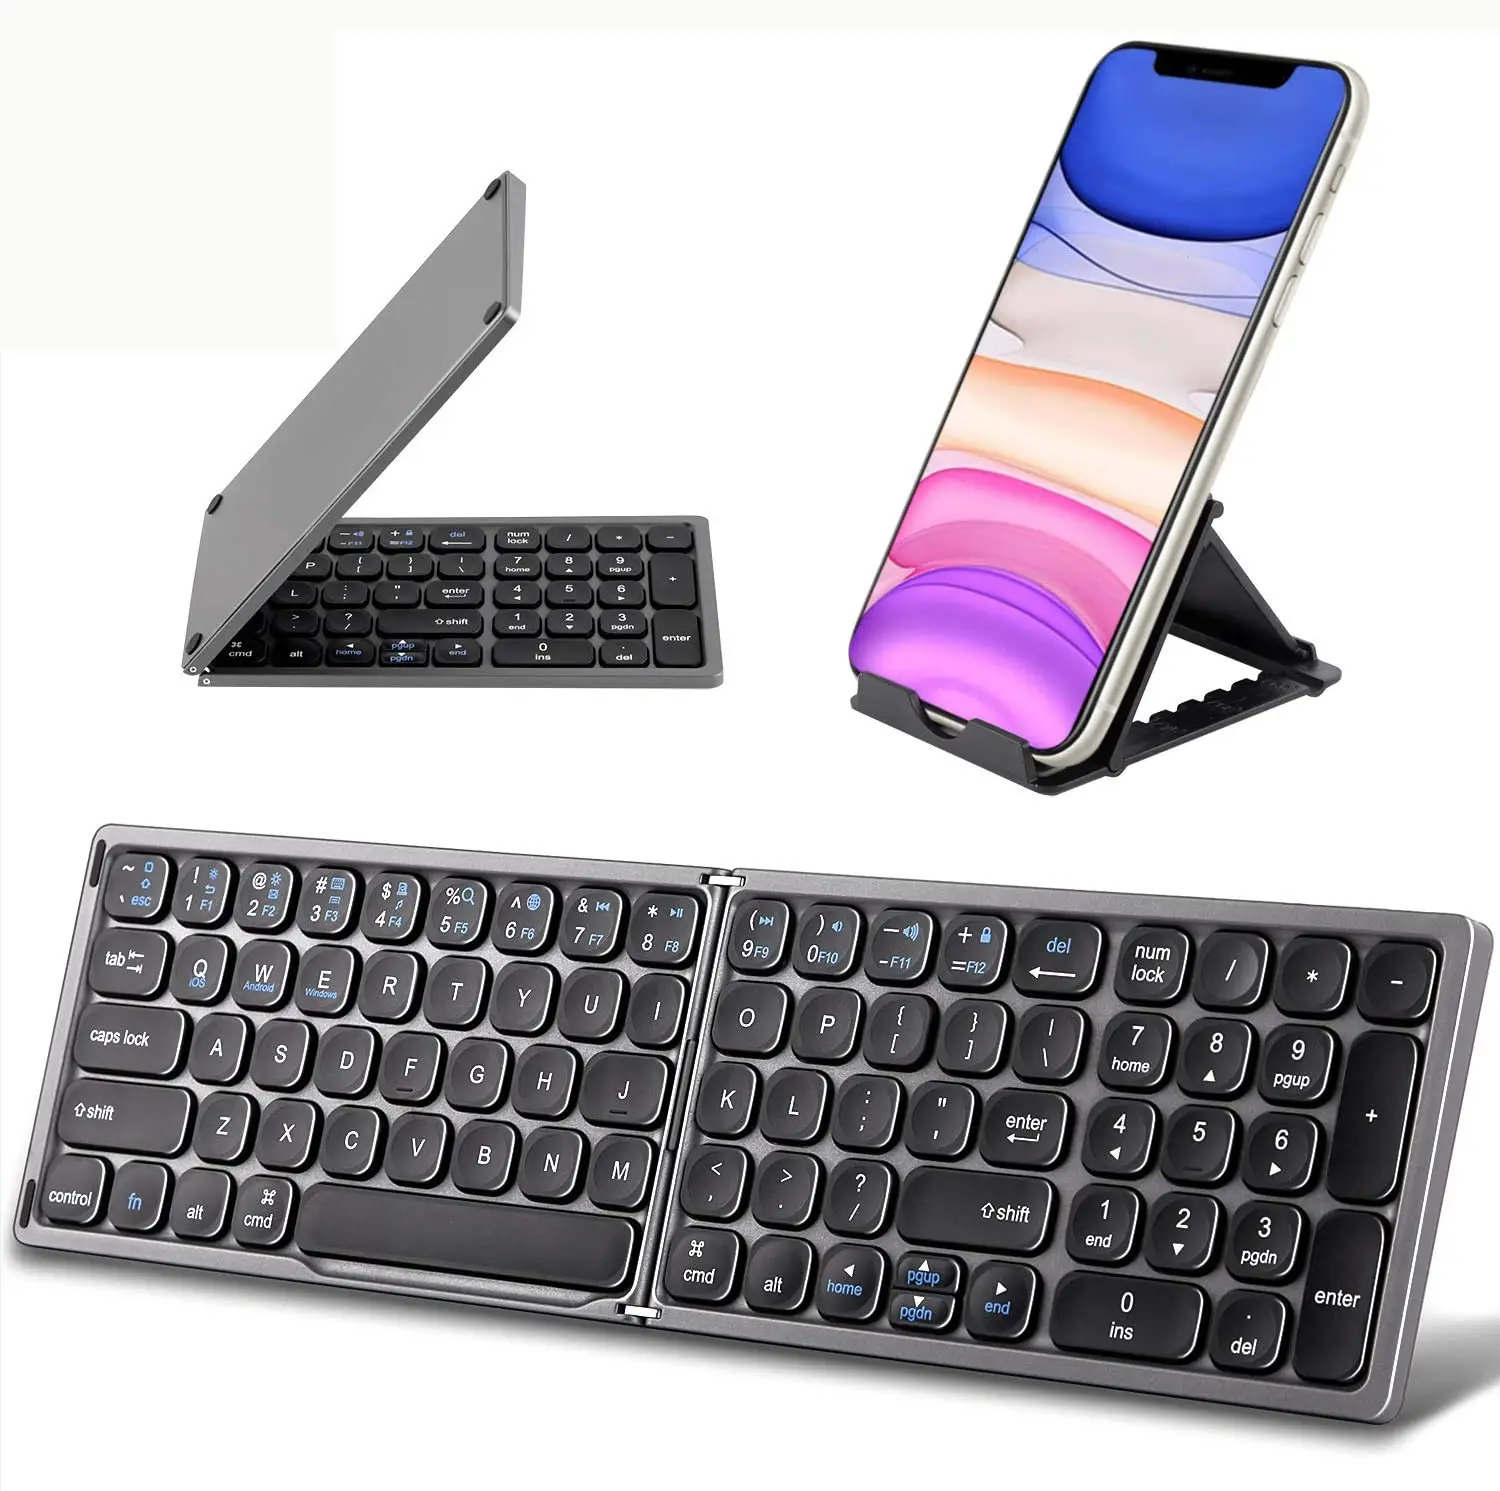 Plaats Toepassen Amerikaans voetbal Azerty Foldable Silent Wireless Bluetooth Fordable Keyboard - Buy Wireless  Bluetooth Fordable Keyboard,Azerty Keyboard Silicone Foldable  Silent,Foldable Children Keyboard Product on Alibaba.com